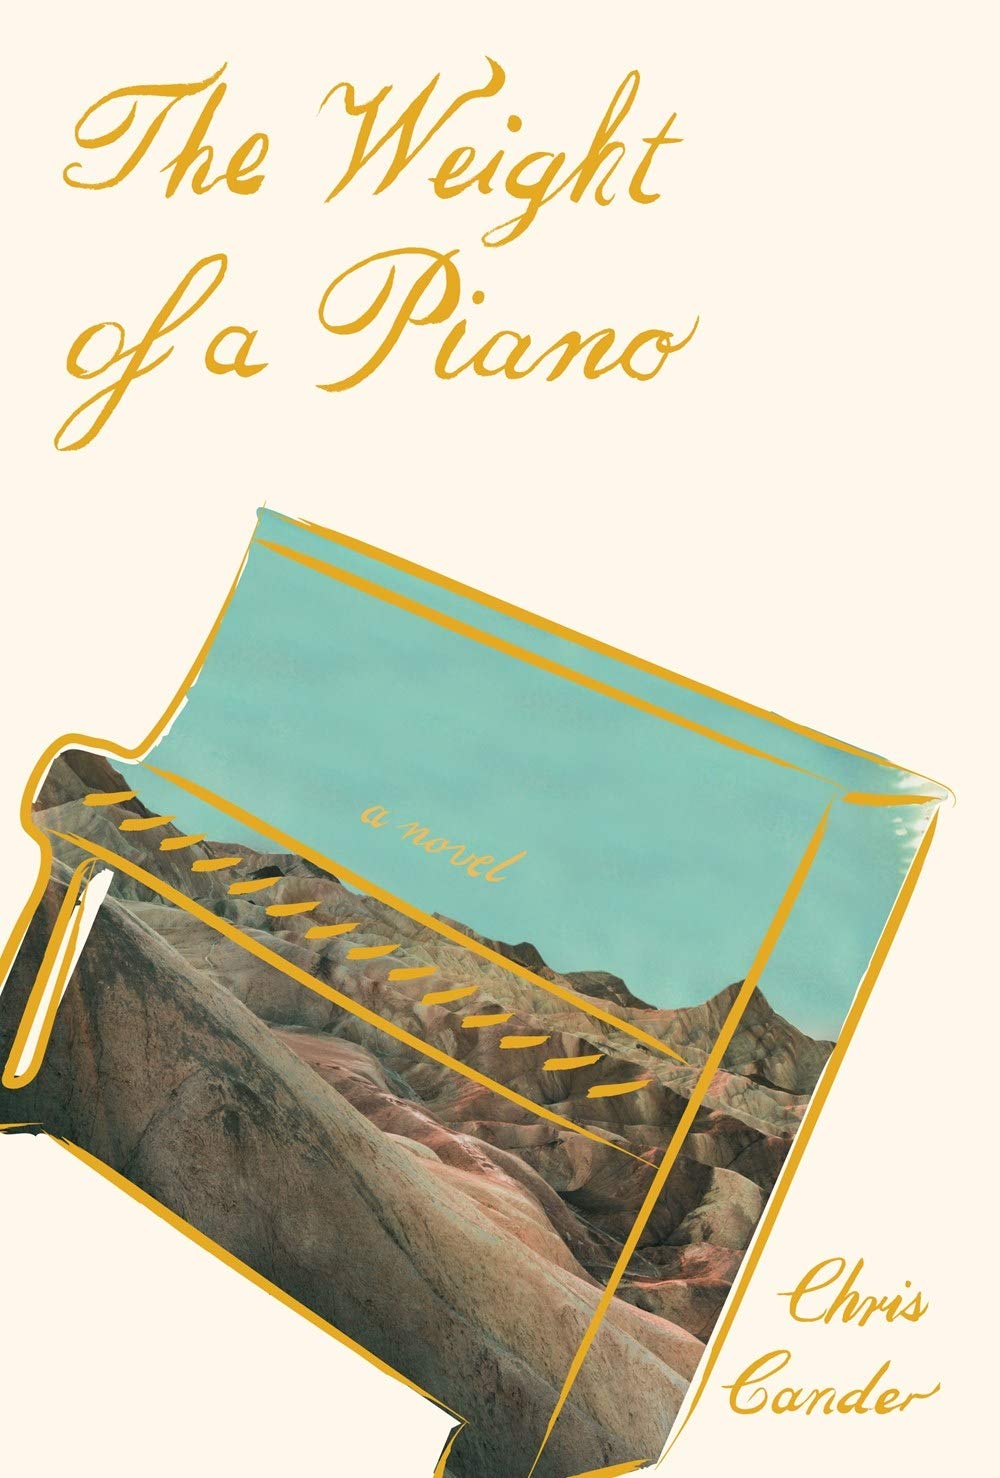 The Weight of a Piano: A novel